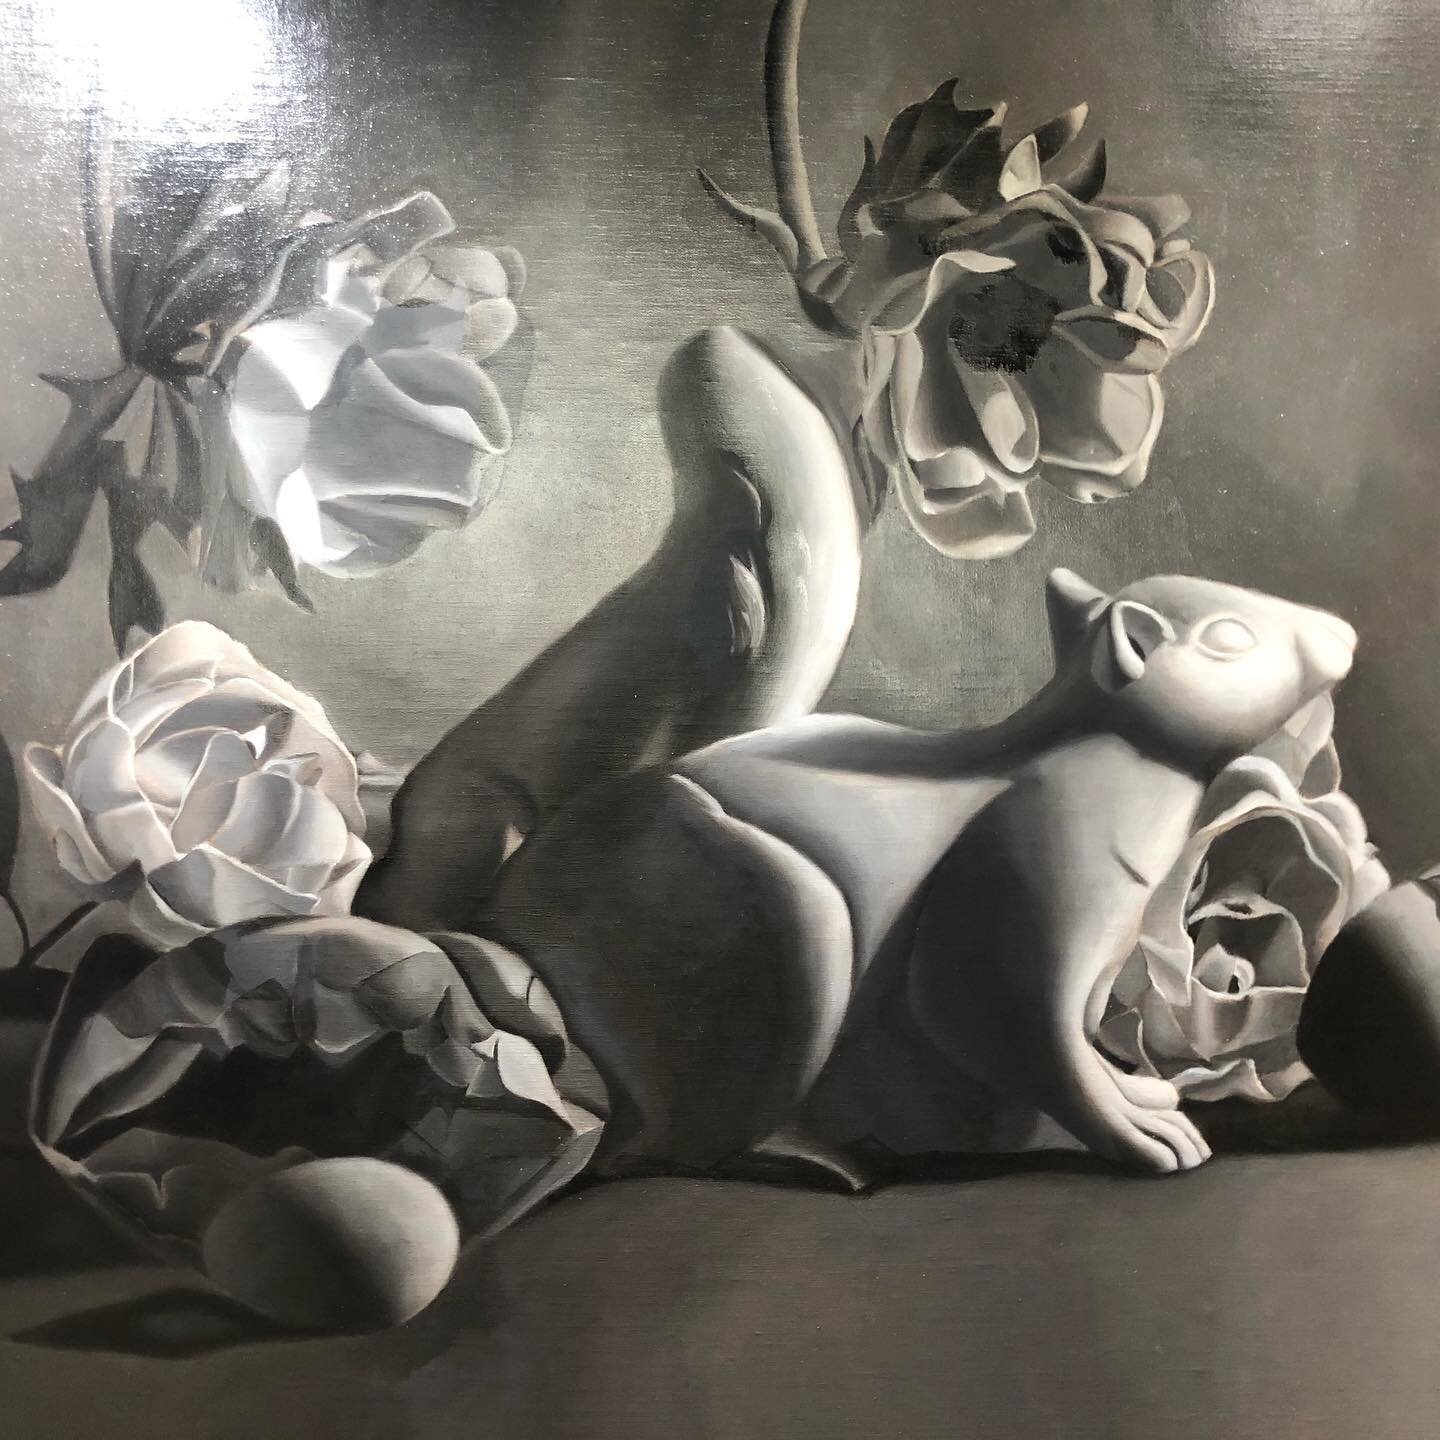 Closed grisaille, (black and white), layers done. Ready for the chroma layers. 

#stilllife #classicalrealism #oilpainting #oilpaintings #sanfranciscoartists #artexplosionstudios